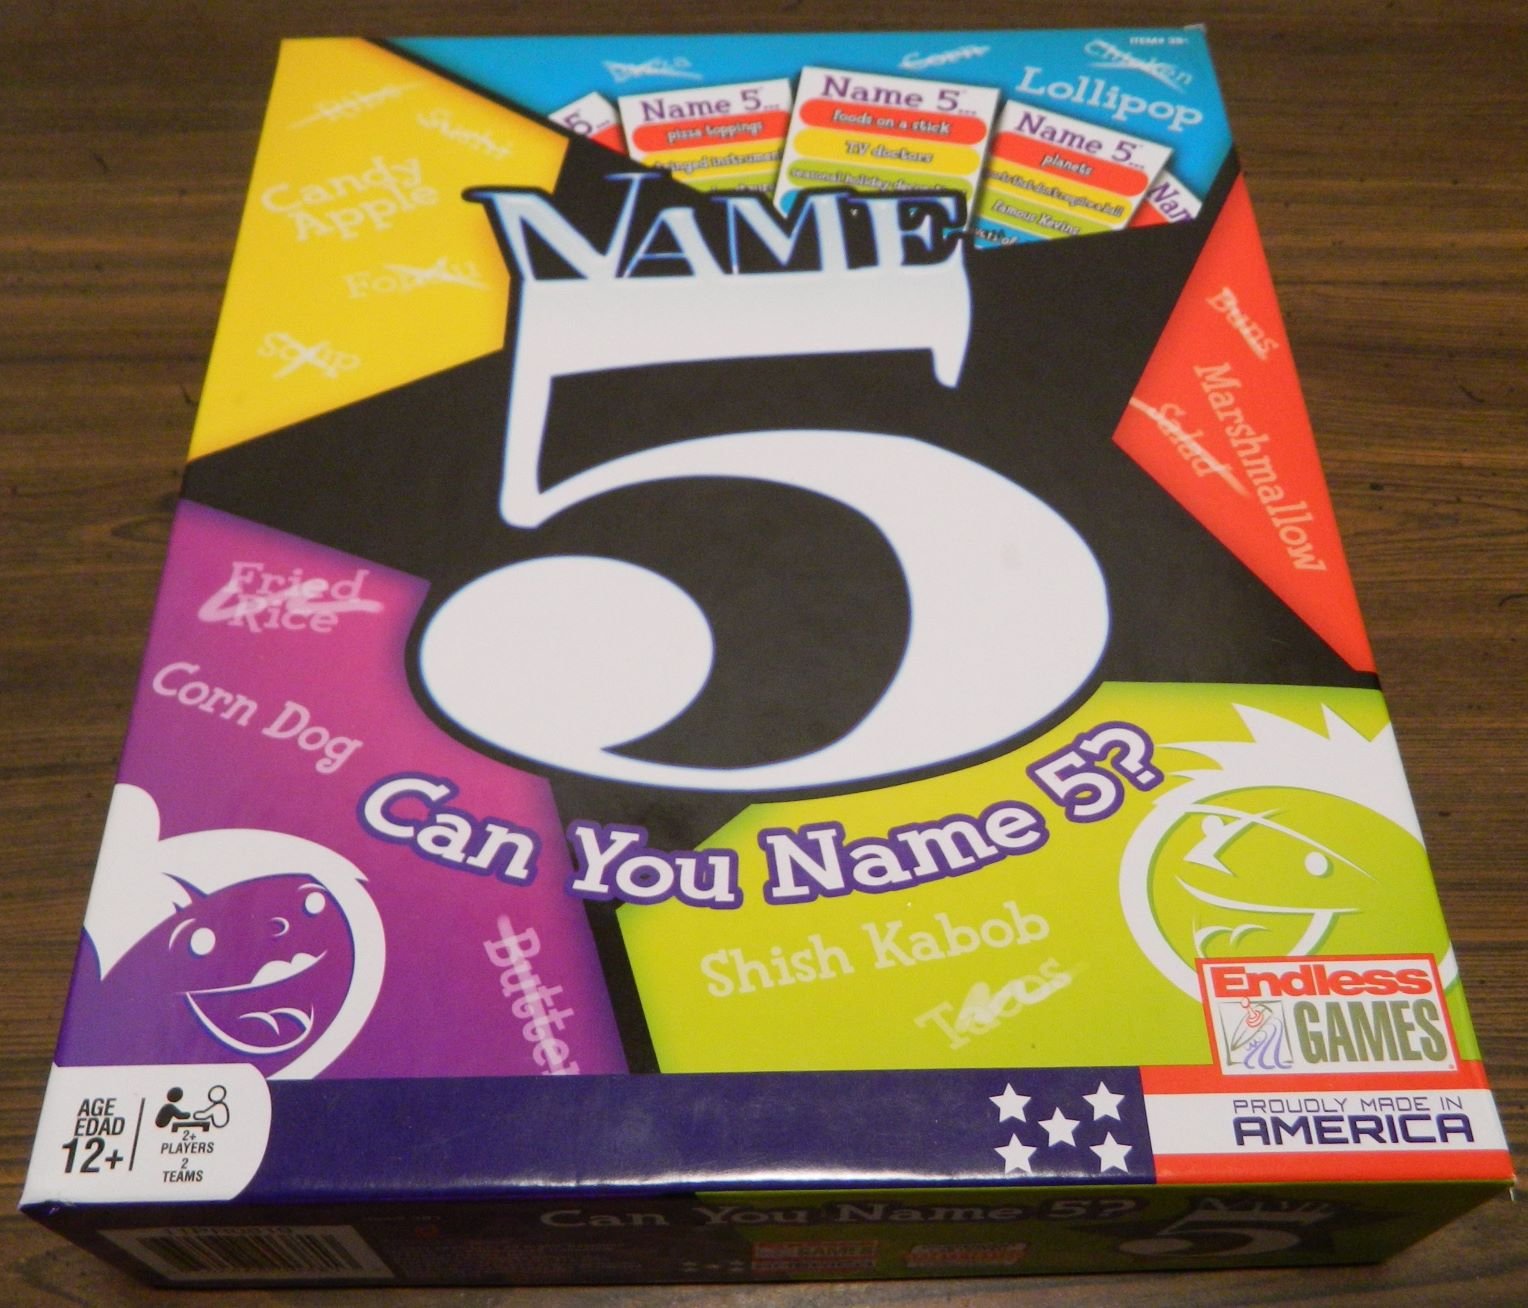 Name 5 Board Game Review and Rules